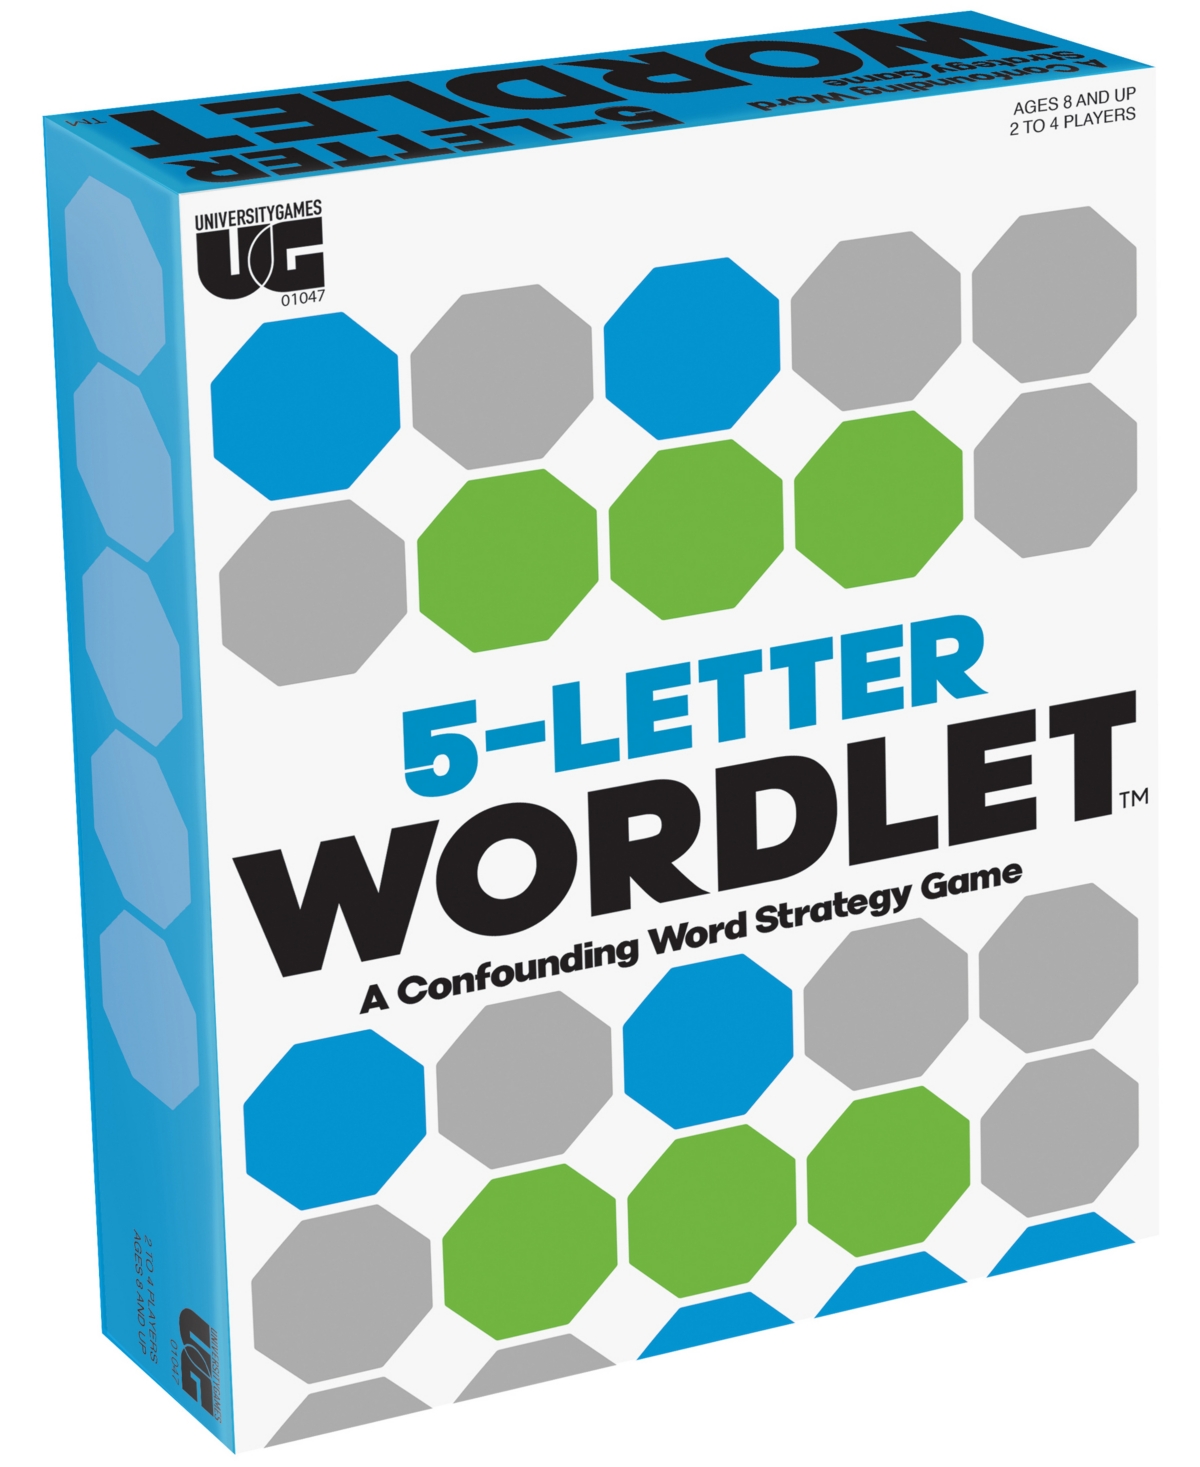 University Games Kids' 5-letter Wordlet A Confounding Word Strategy Game Set, 297 Piece In Multi Color